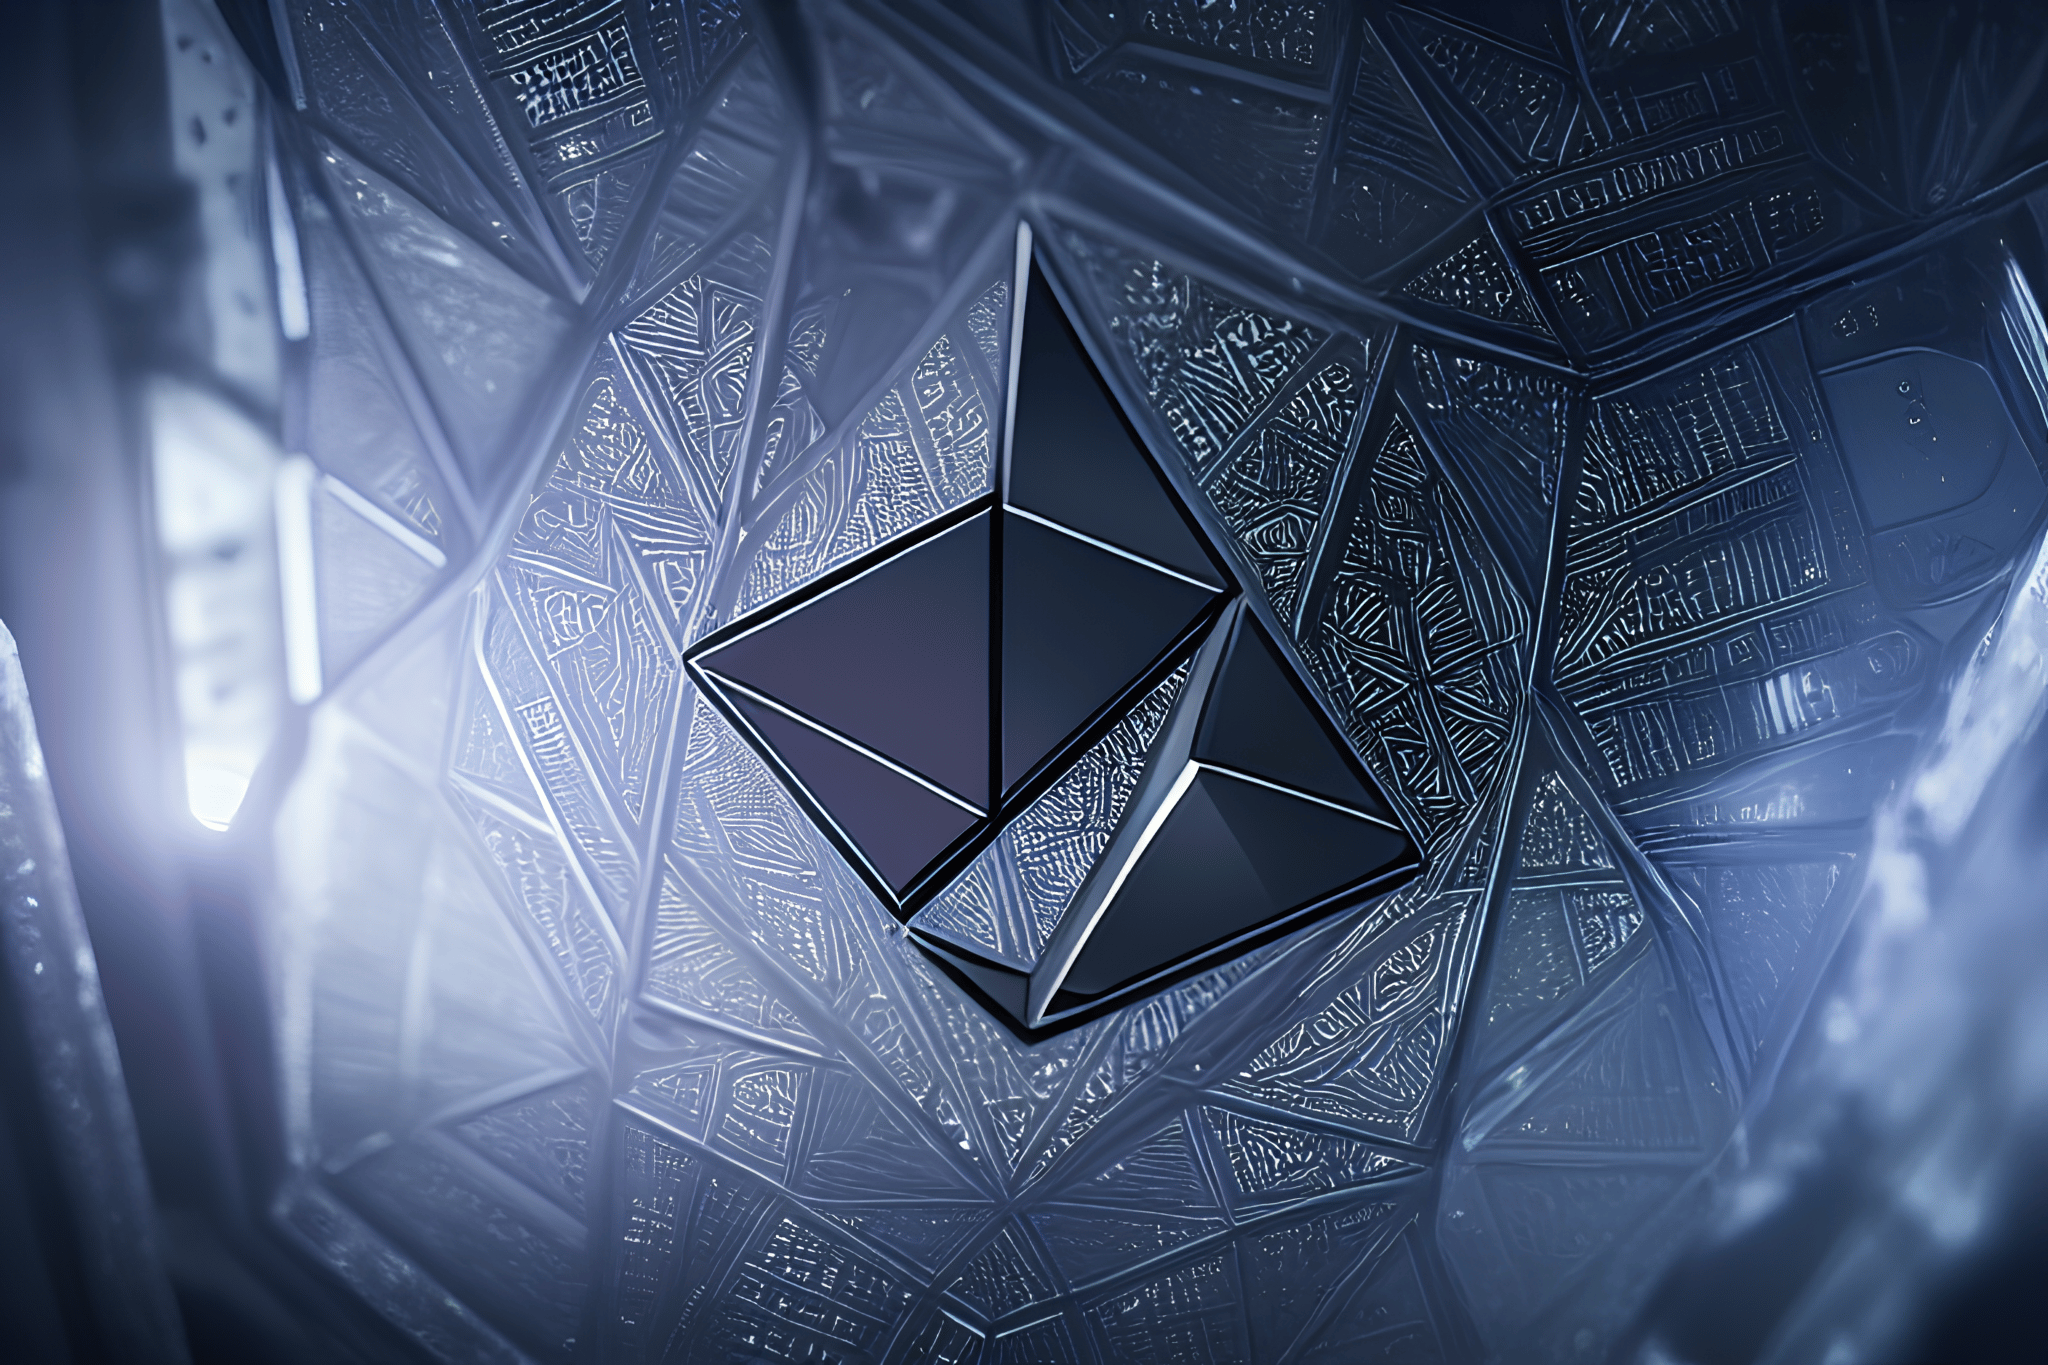 Lido’s latest market move could have ETH stand here despite market conditions